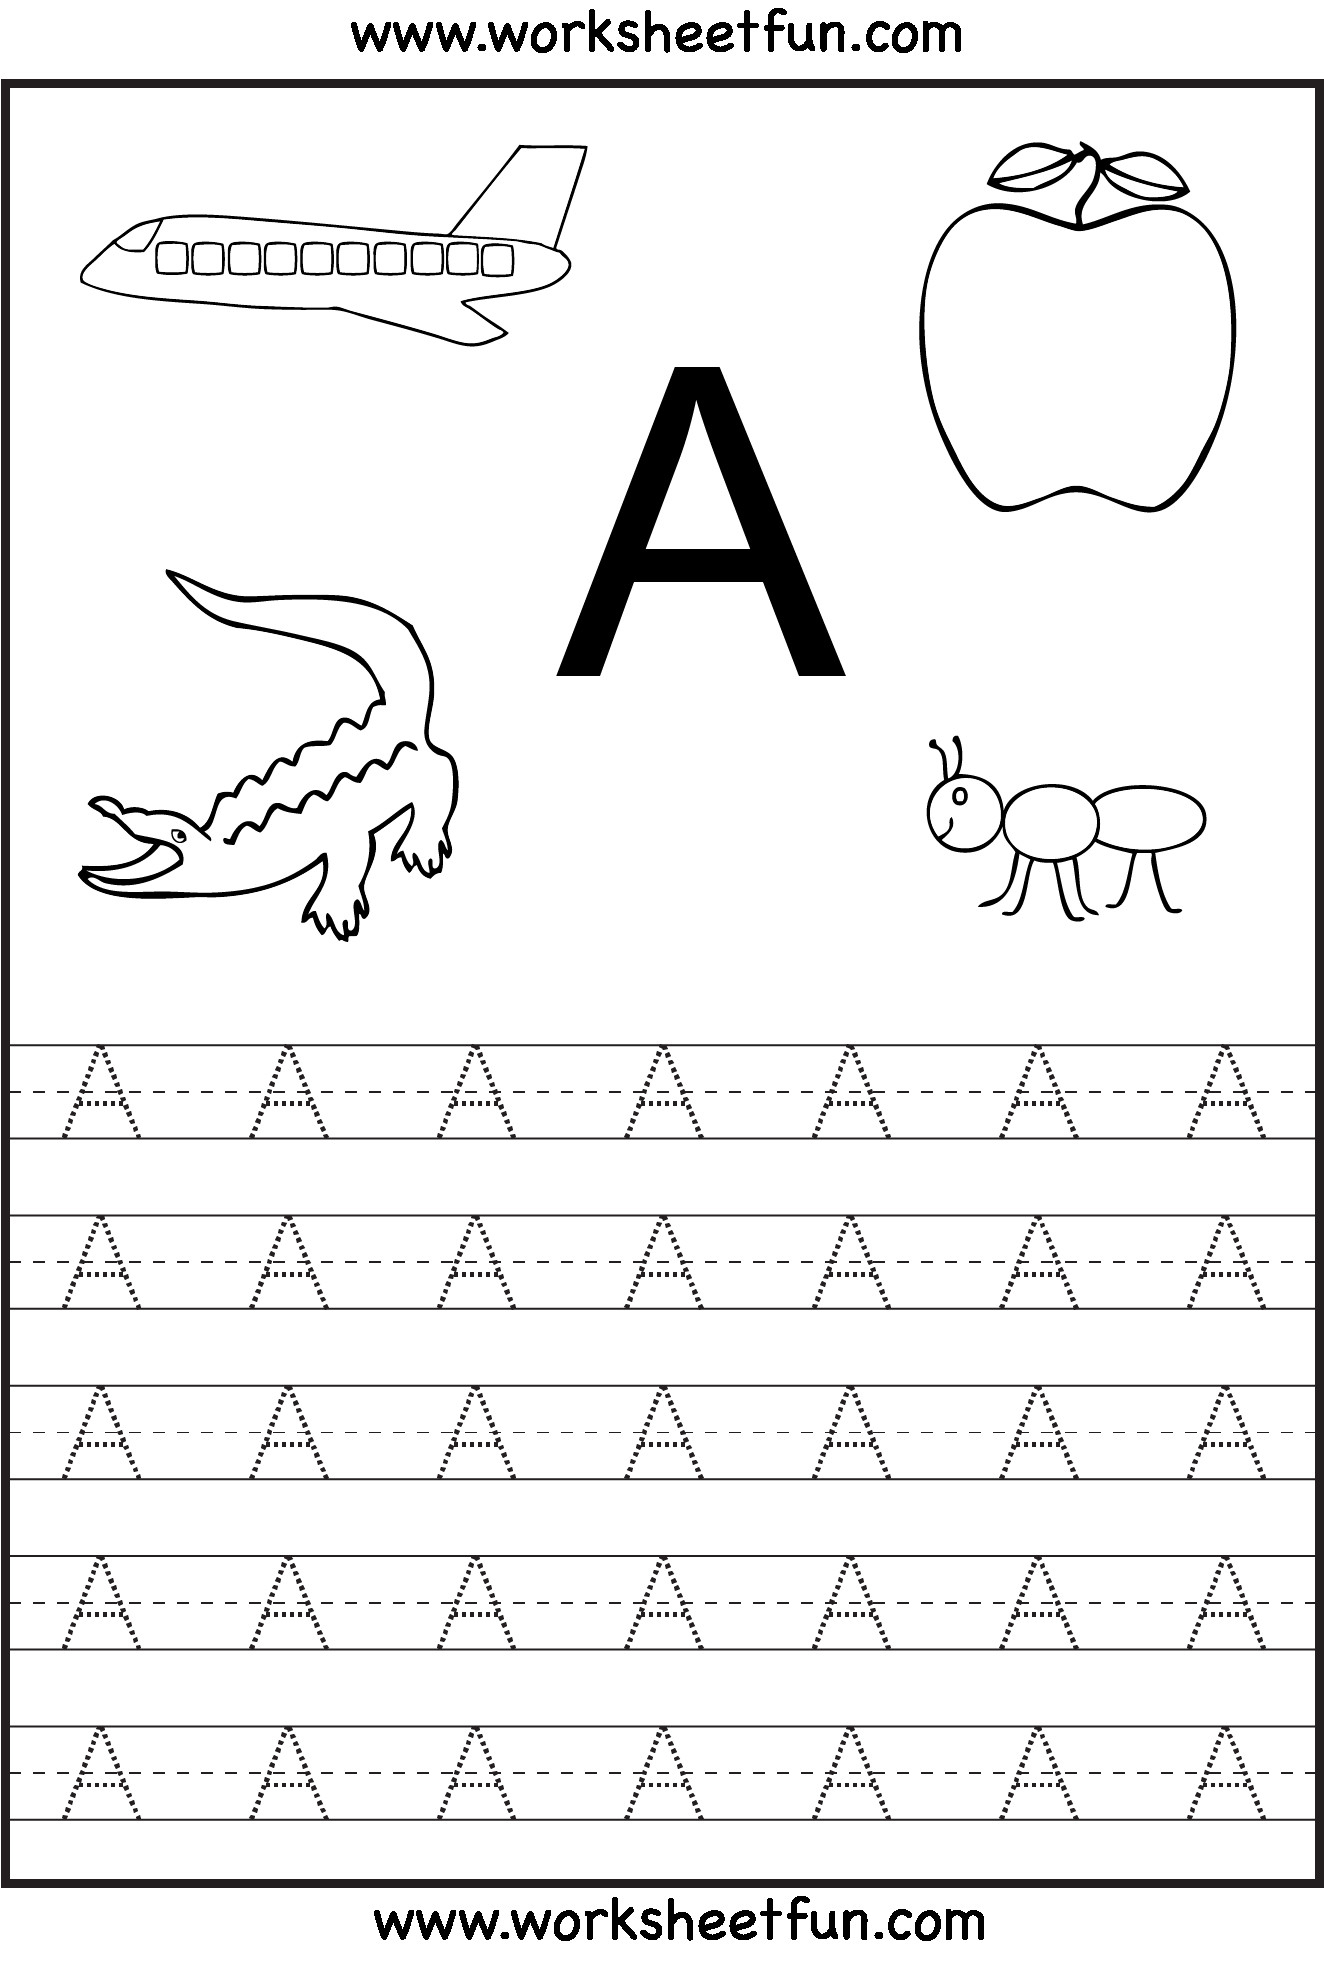 5 Worksheets For 3 Year Olds Tracing 001 – Learning Worksheets throughout Alphabet Worksheets 3 Year Olds